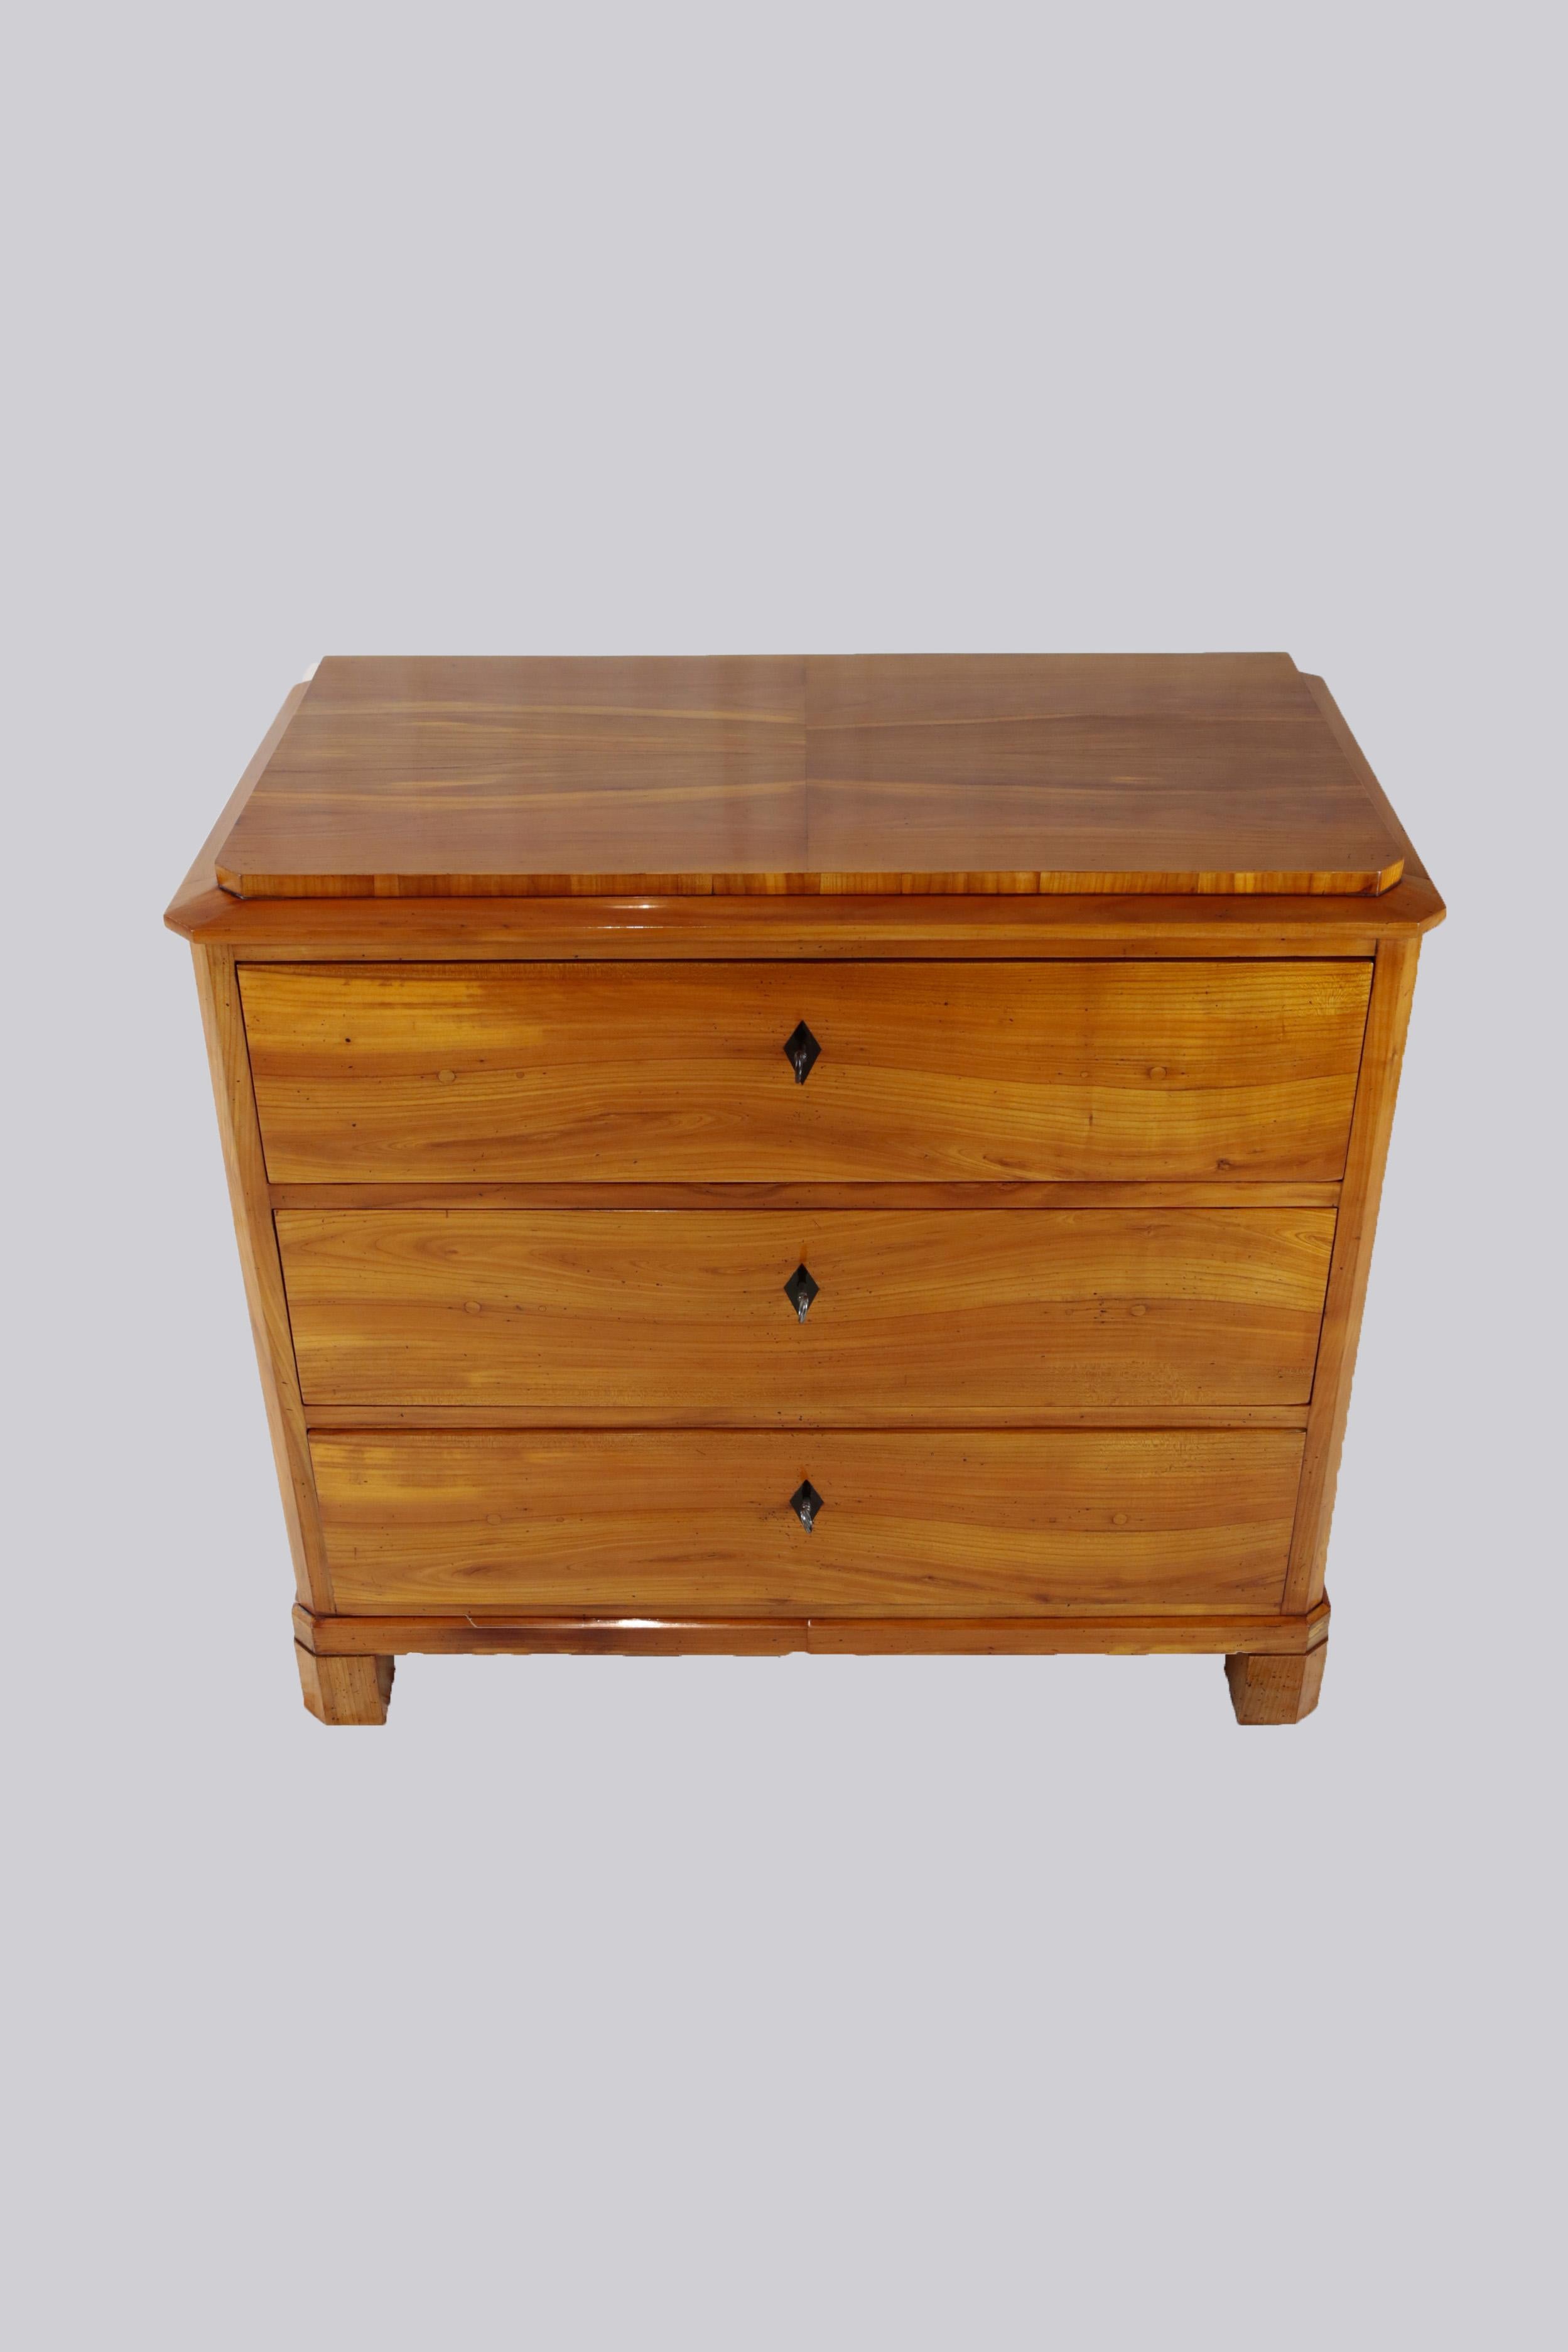 The Biedermeier chest of drawers with 3 drawers, designed in a straight line, was created around 1820-1830. The straight lines of the chest of drawers are accentuated by the stepped top and the transverse veneer on the drawers. Each of the drawers